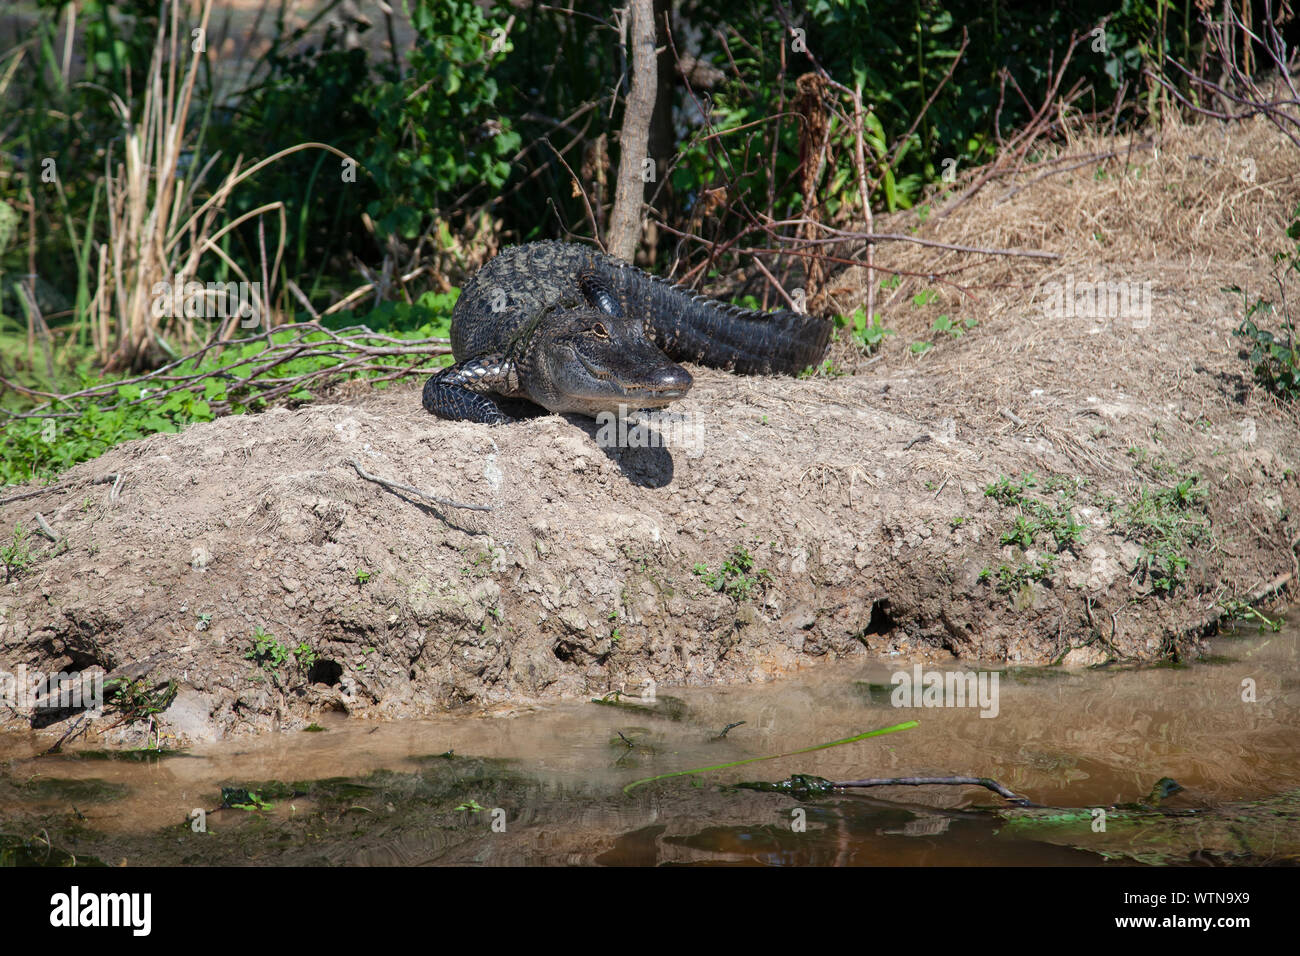 An American alligator suns on the banks of a lake in East Texas. Stock Photo